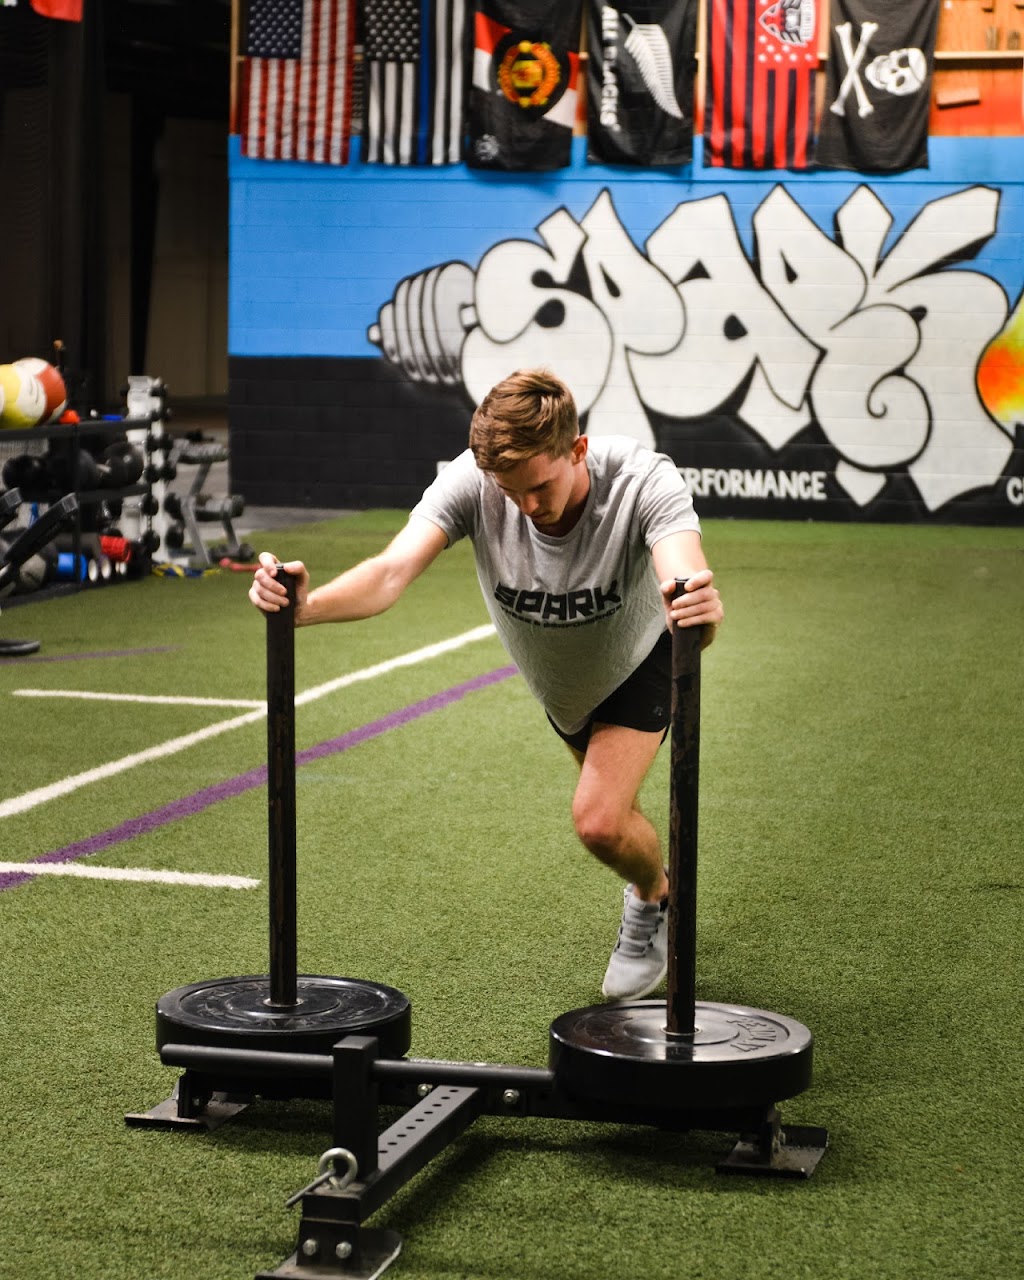 Spark Fitness and Performance | 416 W King St, King, NC 27021, USA | Phone: (336) 296-0020